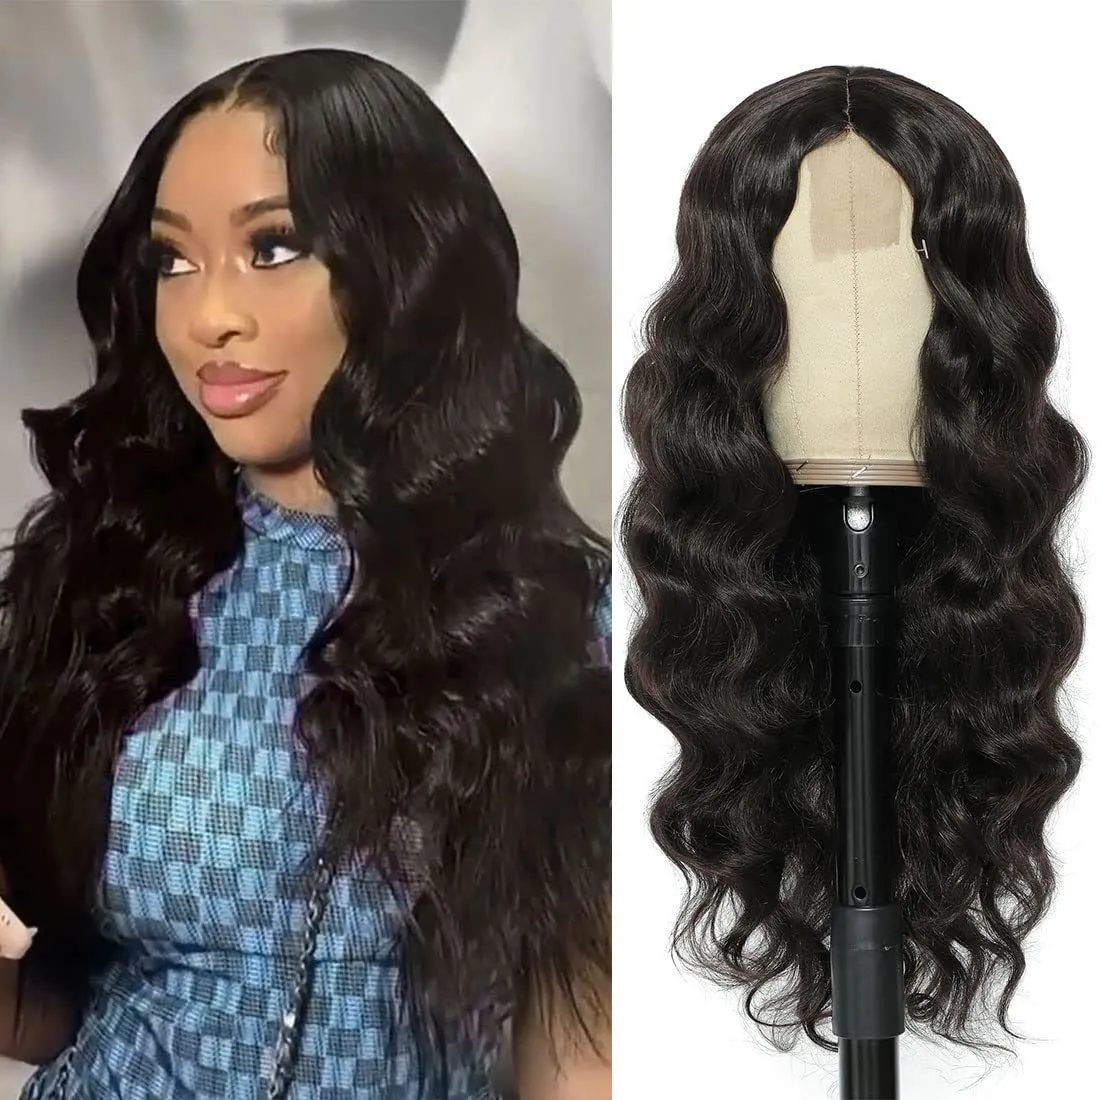 Long Deep Wave Full Lace Front Wigs Human Hair curly hair 6 styles wigs female lace wigs synthetic natural hair lace wigs fast